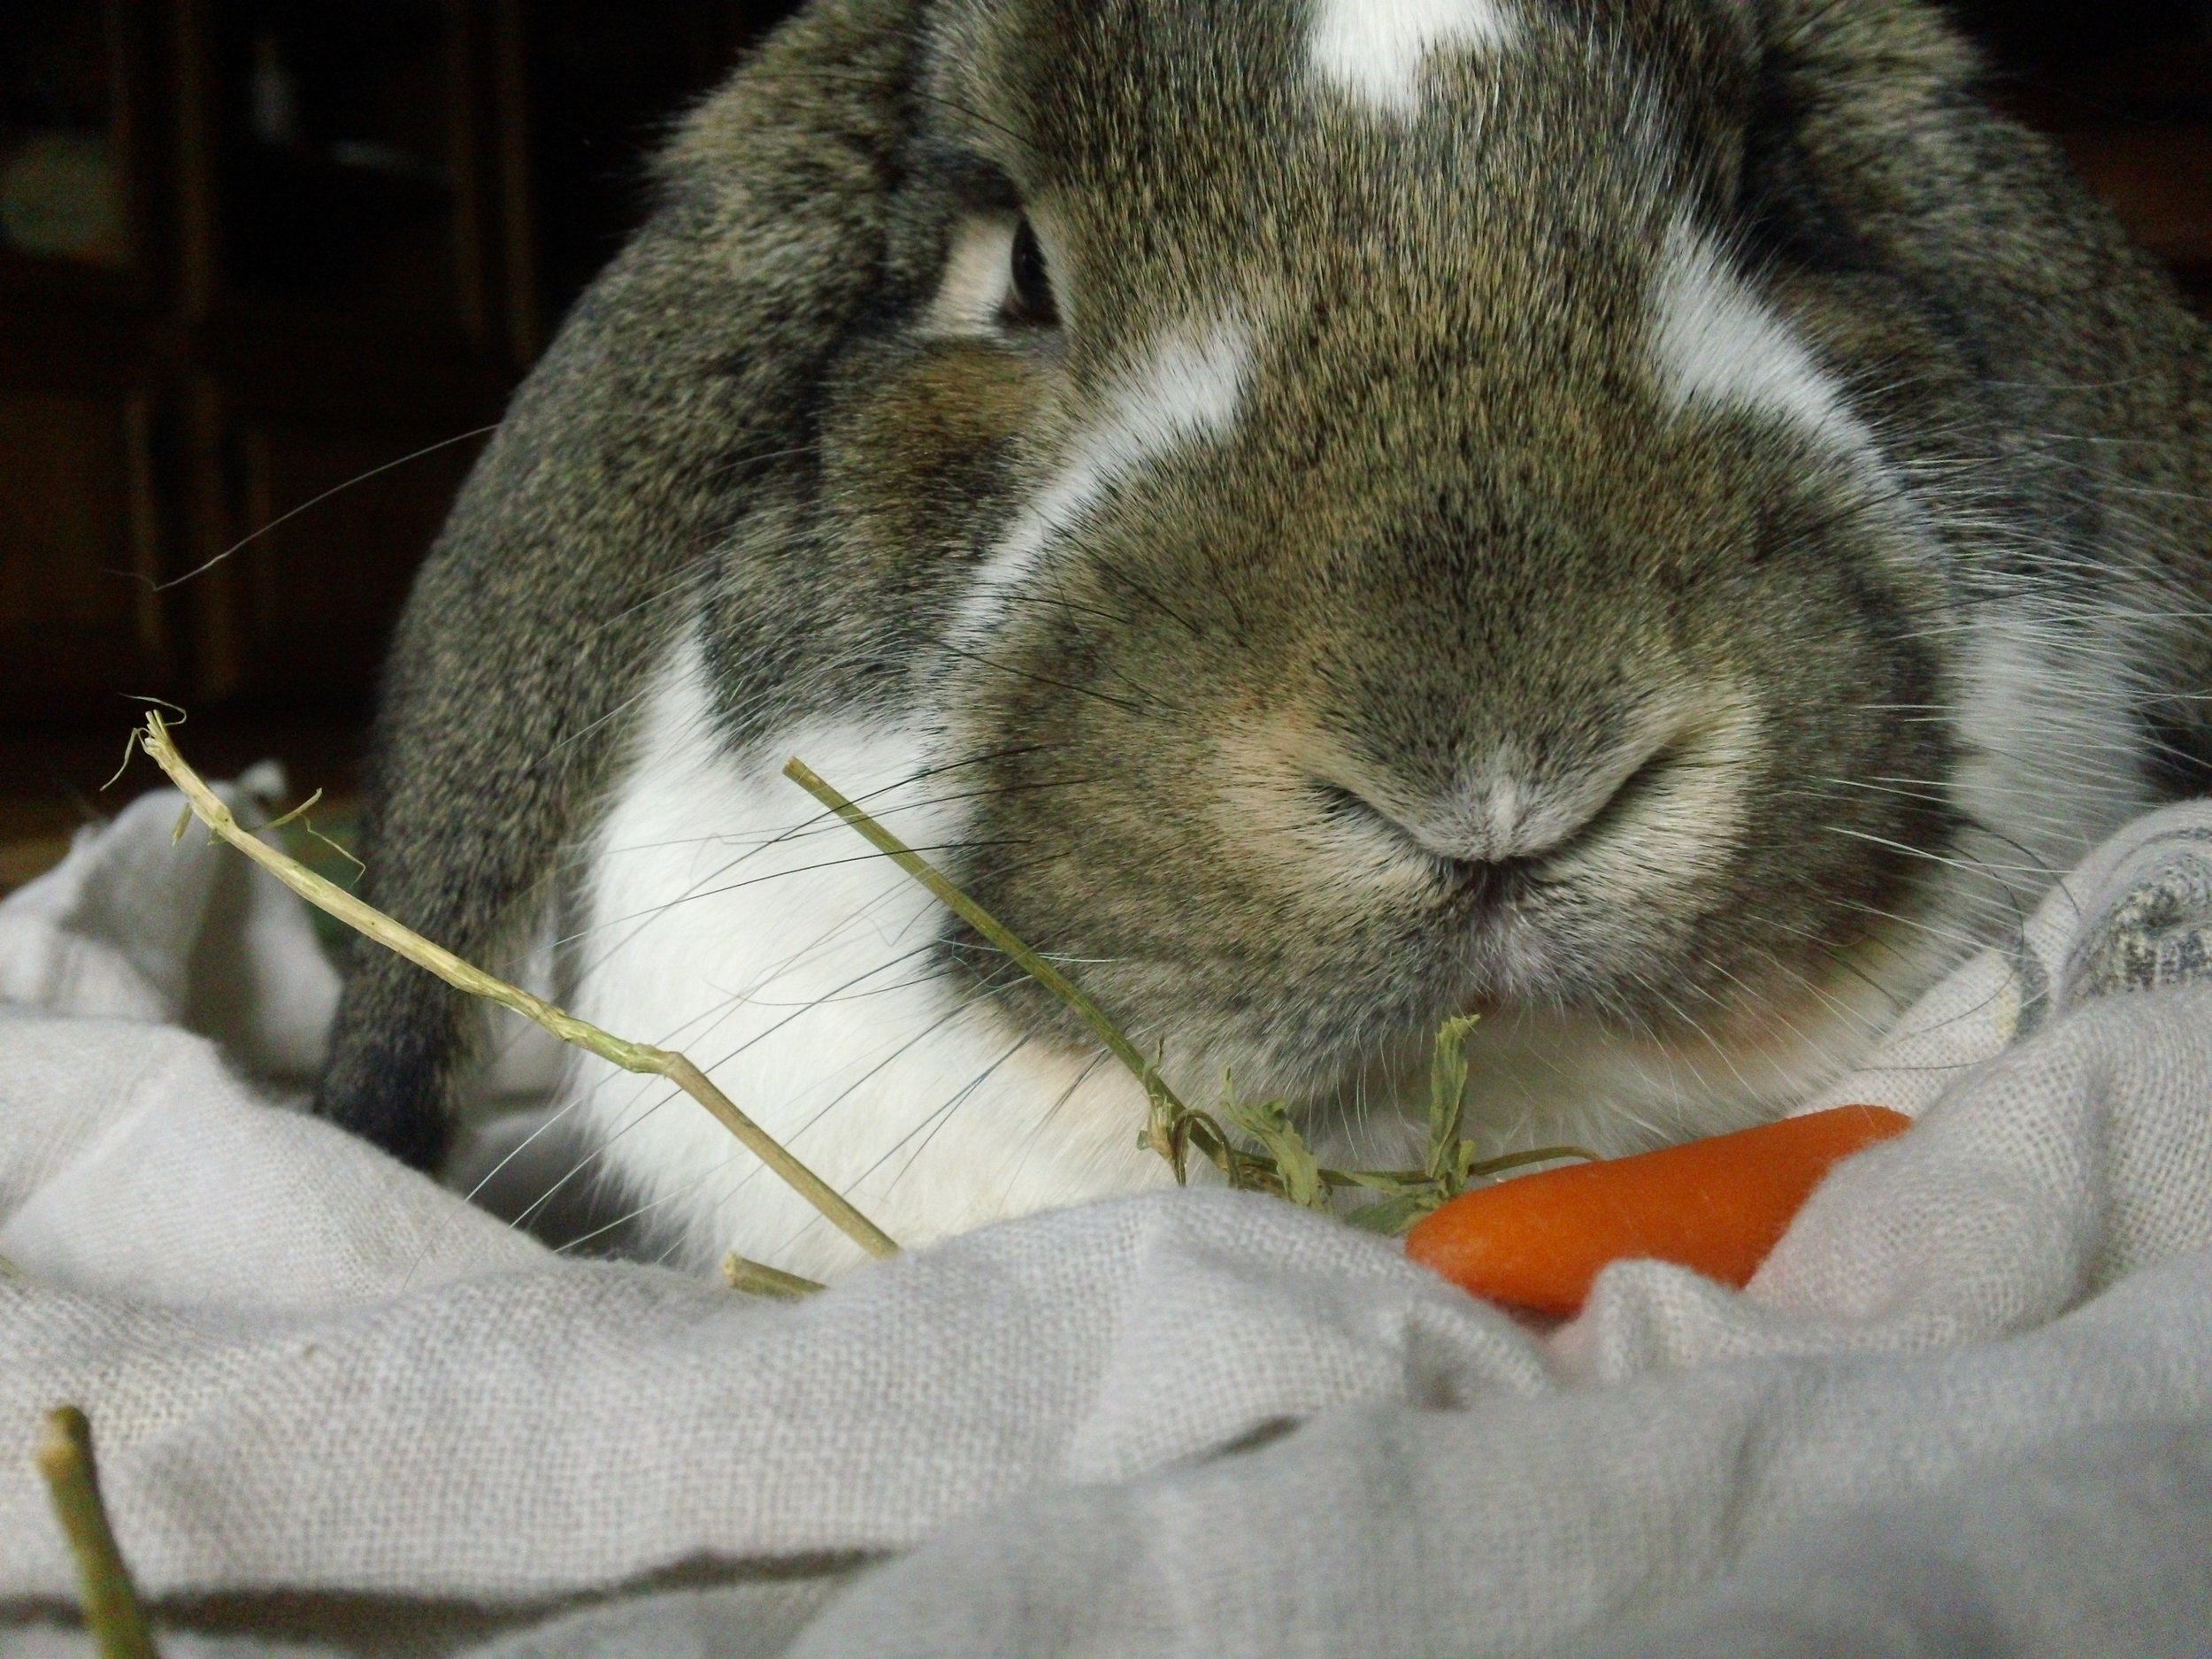 You Get Your Own Carrot, Human. This One's Mine.